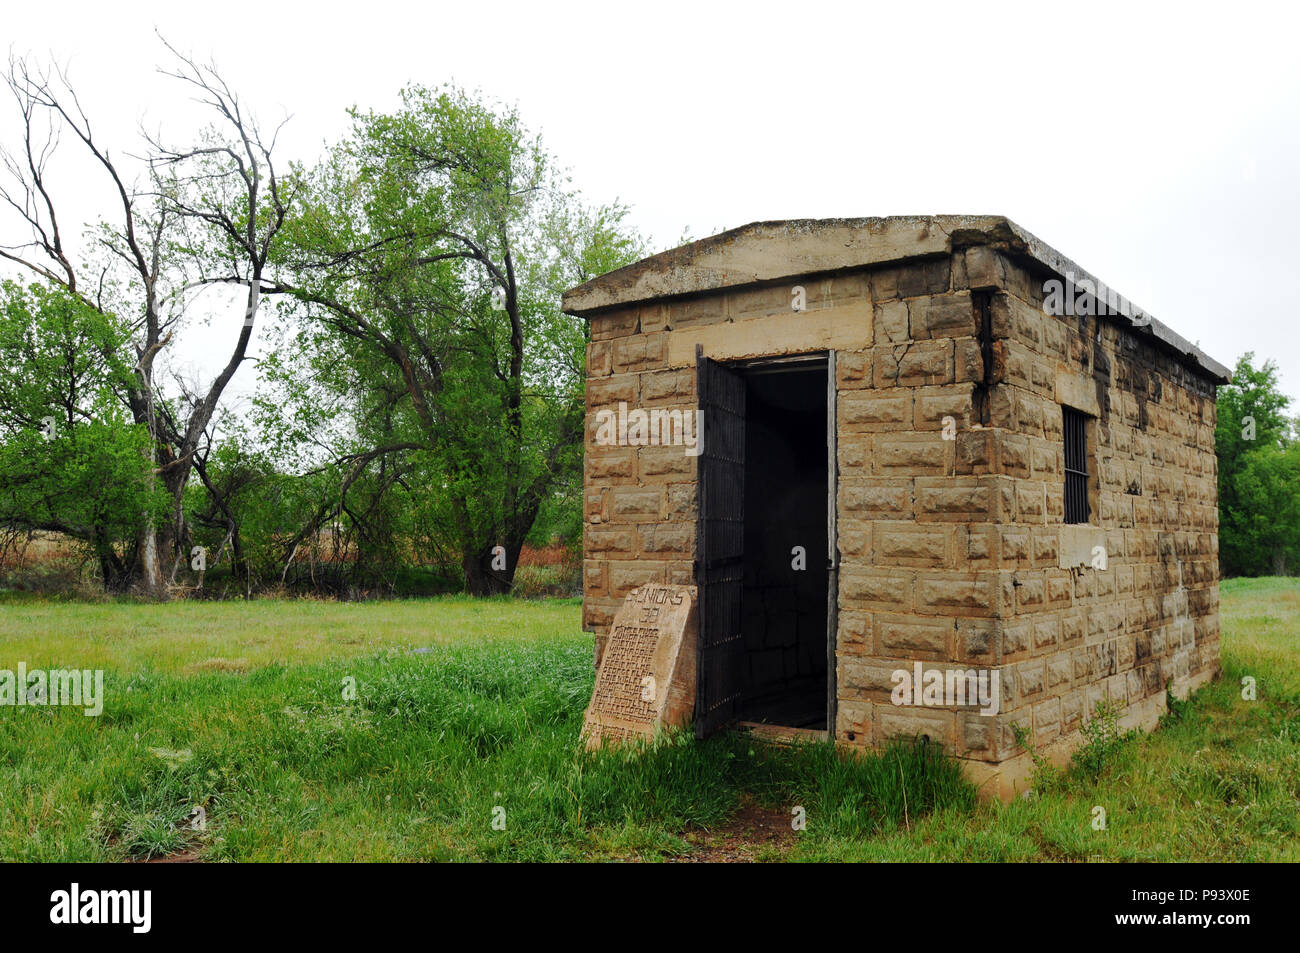 An old one-room territorial jail stands in the Route 66 community of Texola, Oklahoma. The historic structure dates from the early 1900s. Stock Photo